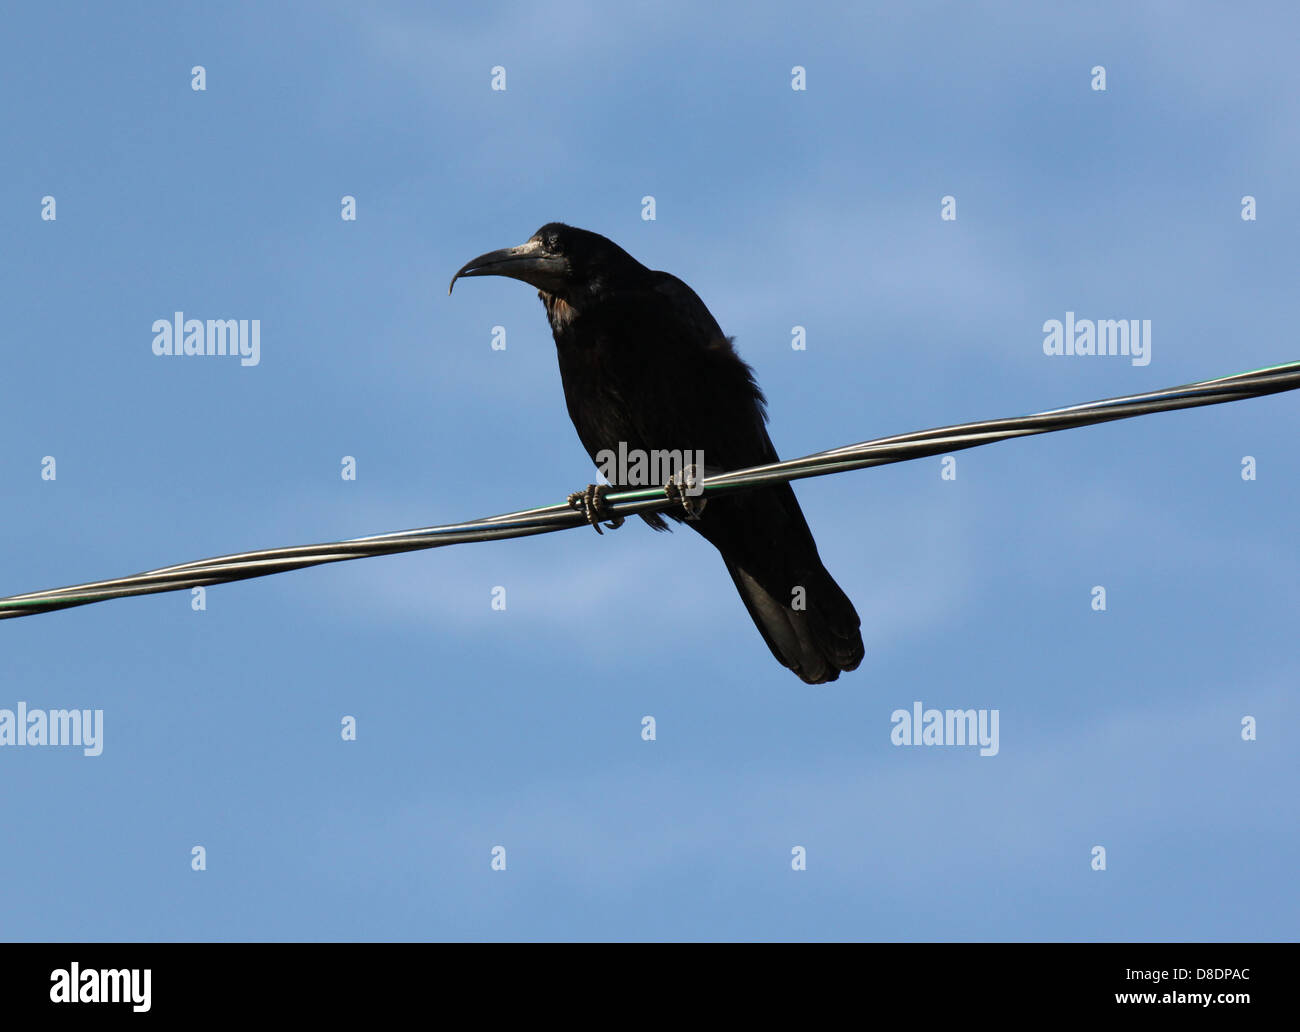 black raven on cable over blue sky Stock Photo